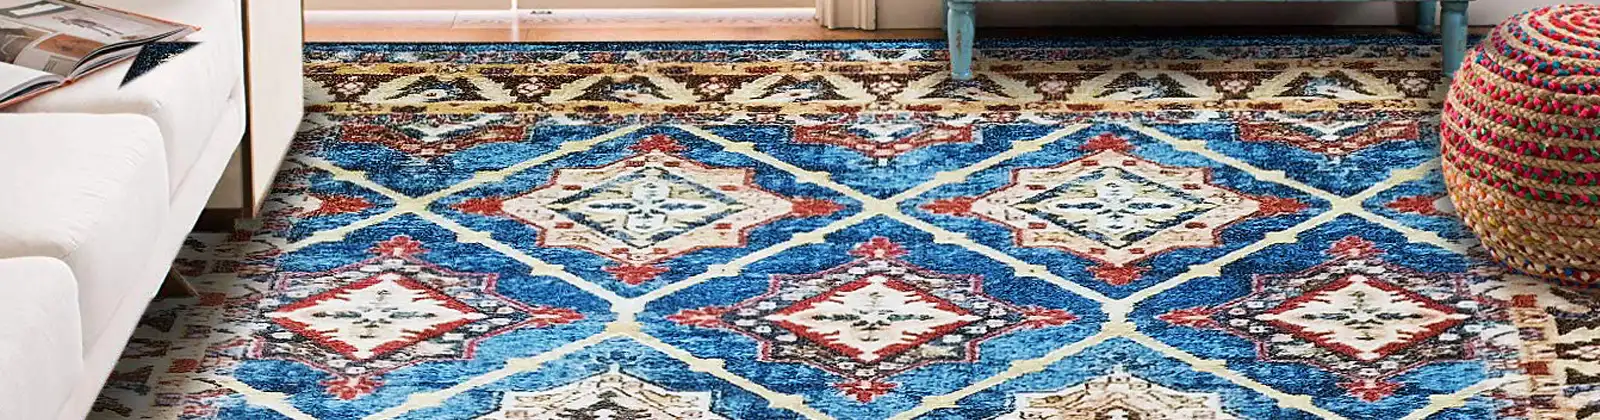 Antique Rug Cleaning Services Pompano Beach